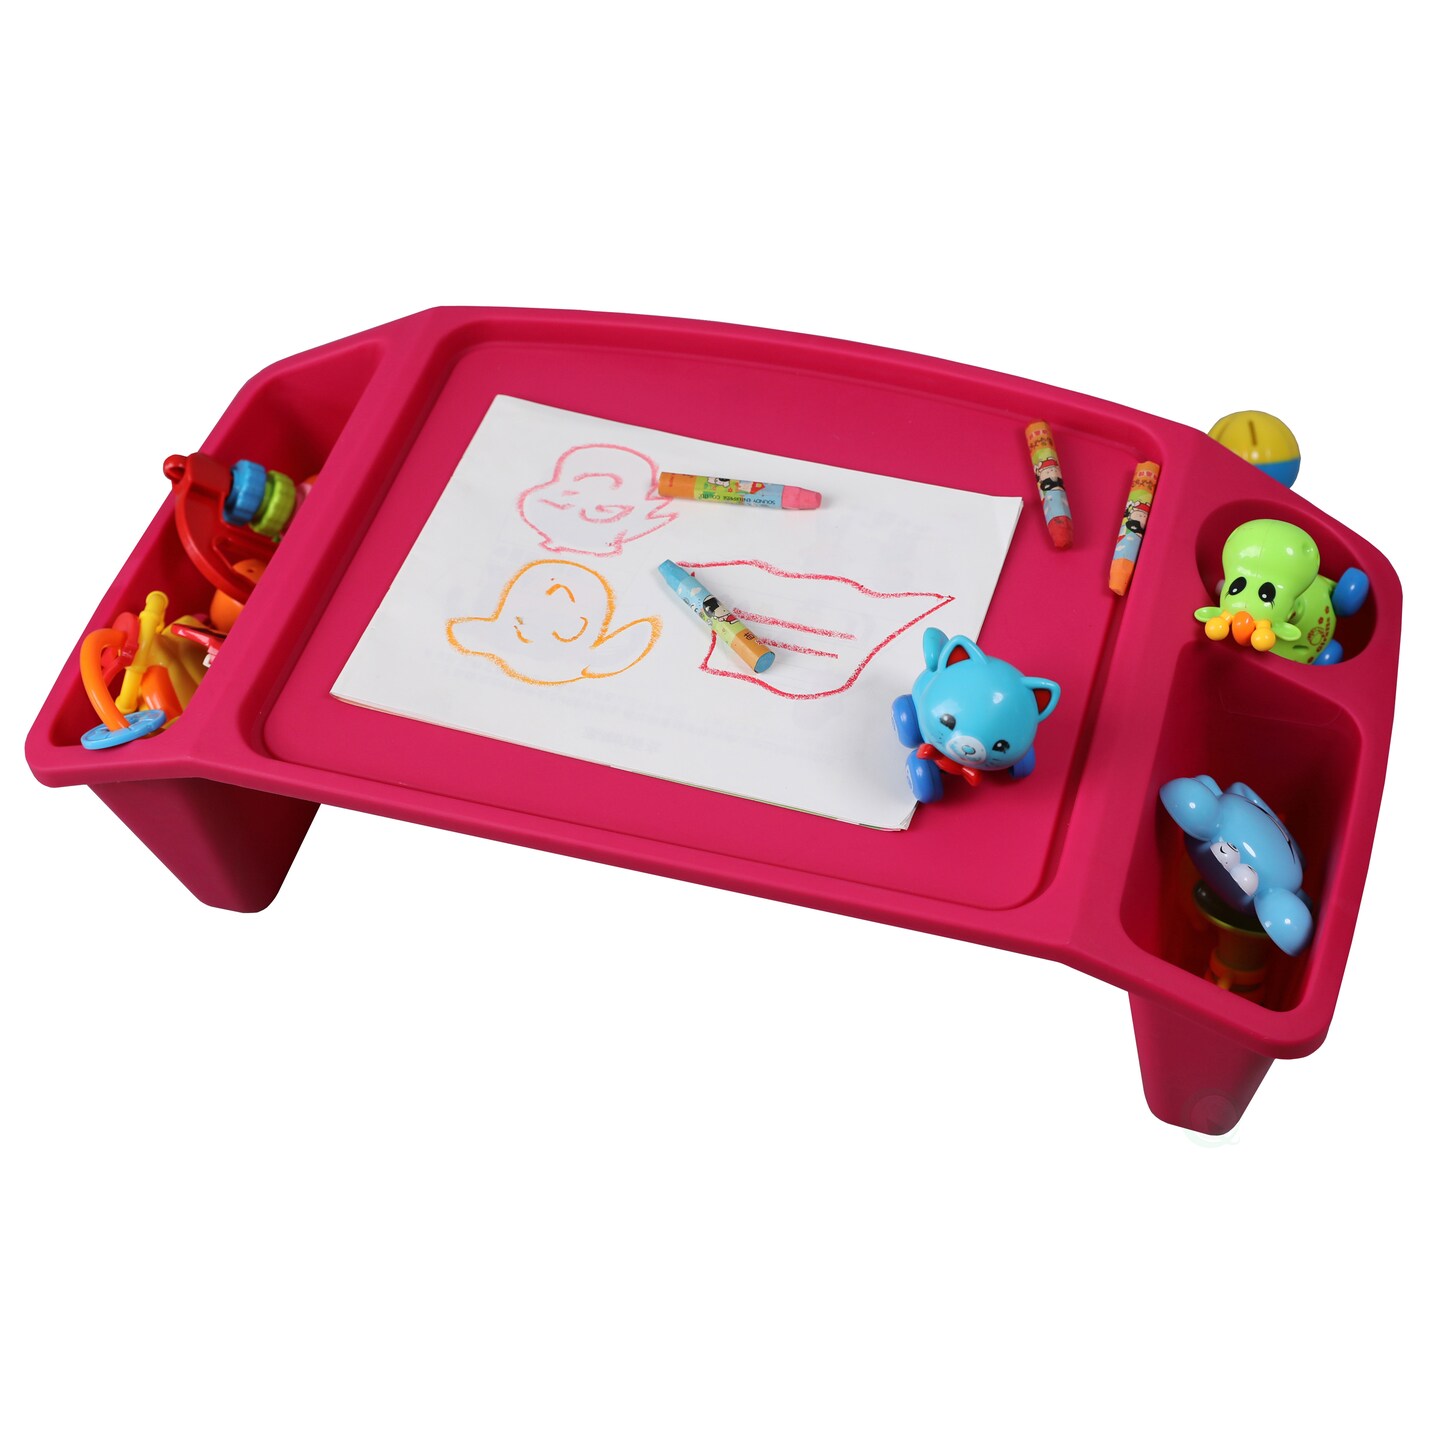 Basicwise Green Kids Lap Desk Tray Portable Activity Table